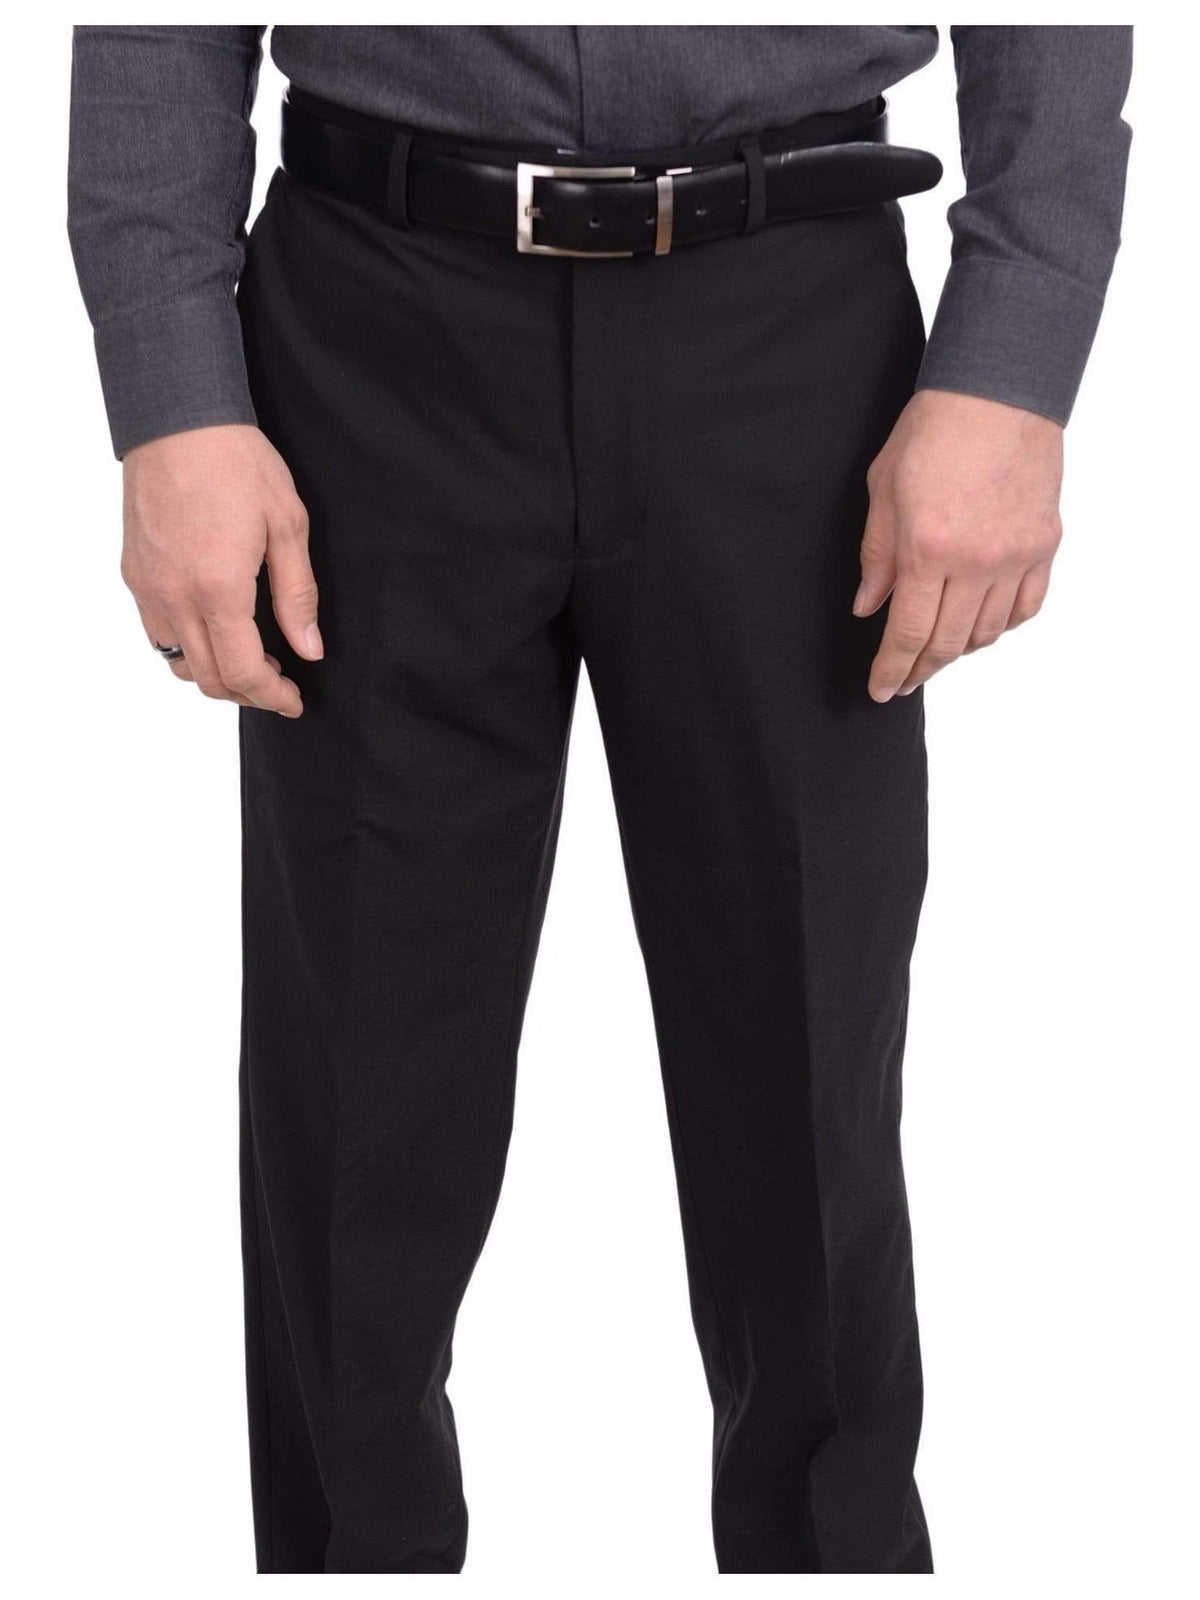 thesuitdepot PANTS Kenneth Cole Classic Fit Solid Black Flat Front Stretch Wool Blend Dress Pants